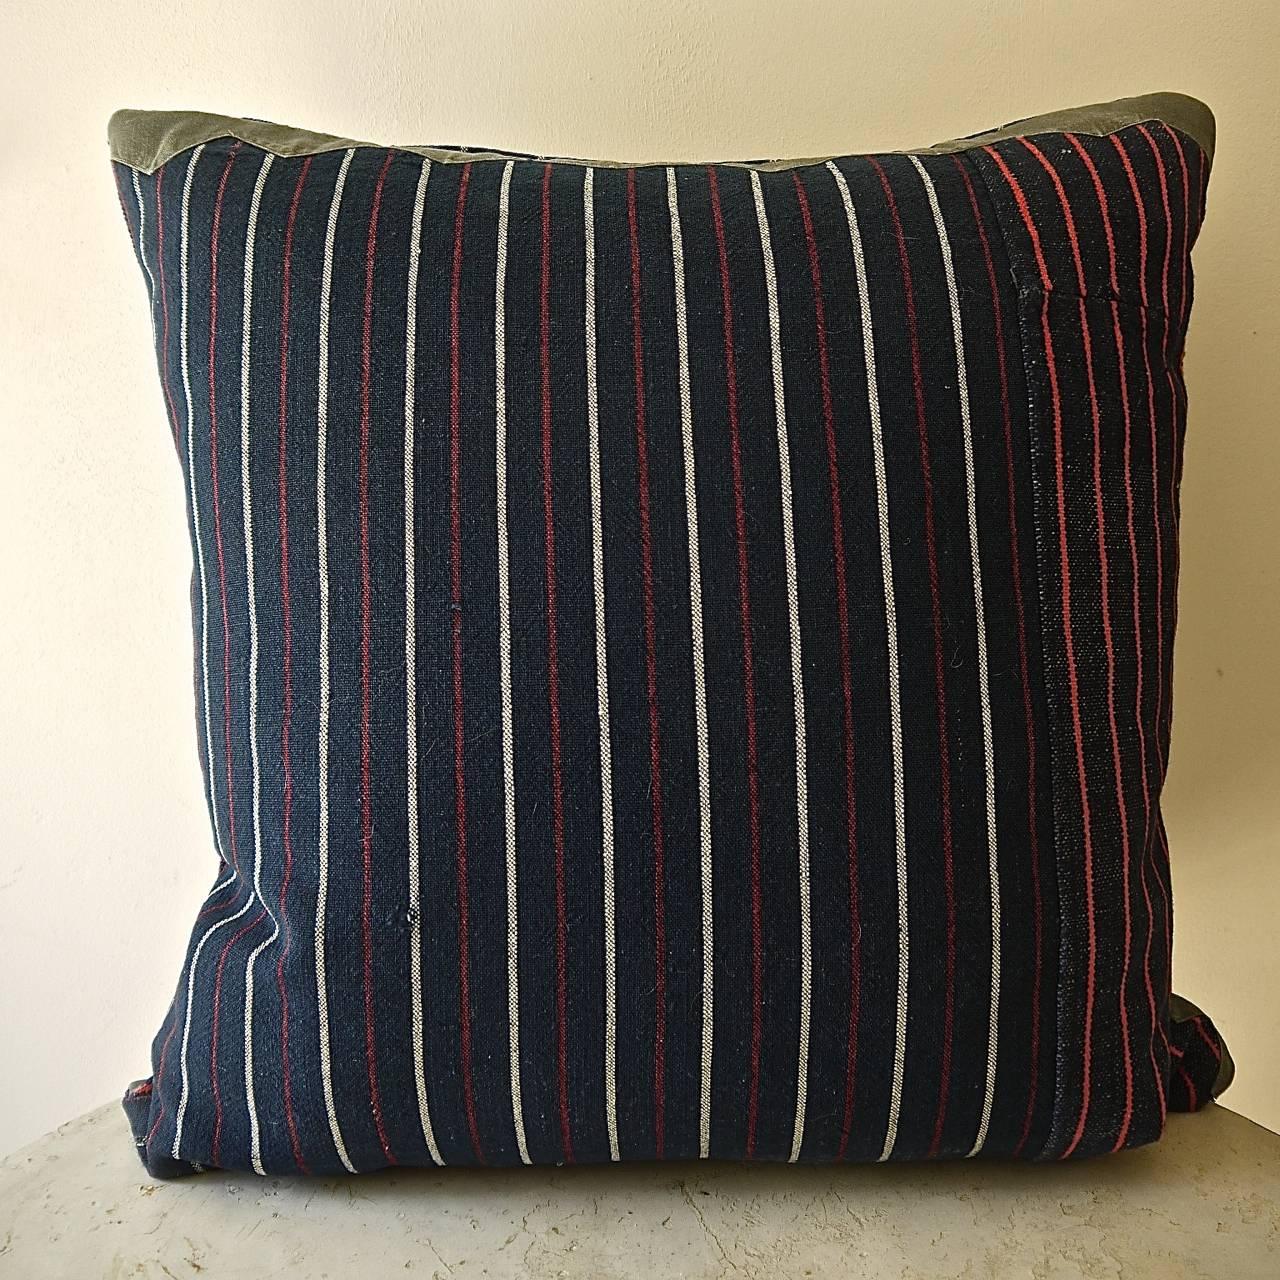 French 19th century woven cotton and wool striped cushion of dark indigo with white, red colors. Original piece made up of two different stripes with an 'as found ' border of a French 19th century grey cotton trim at the top of one side and on the